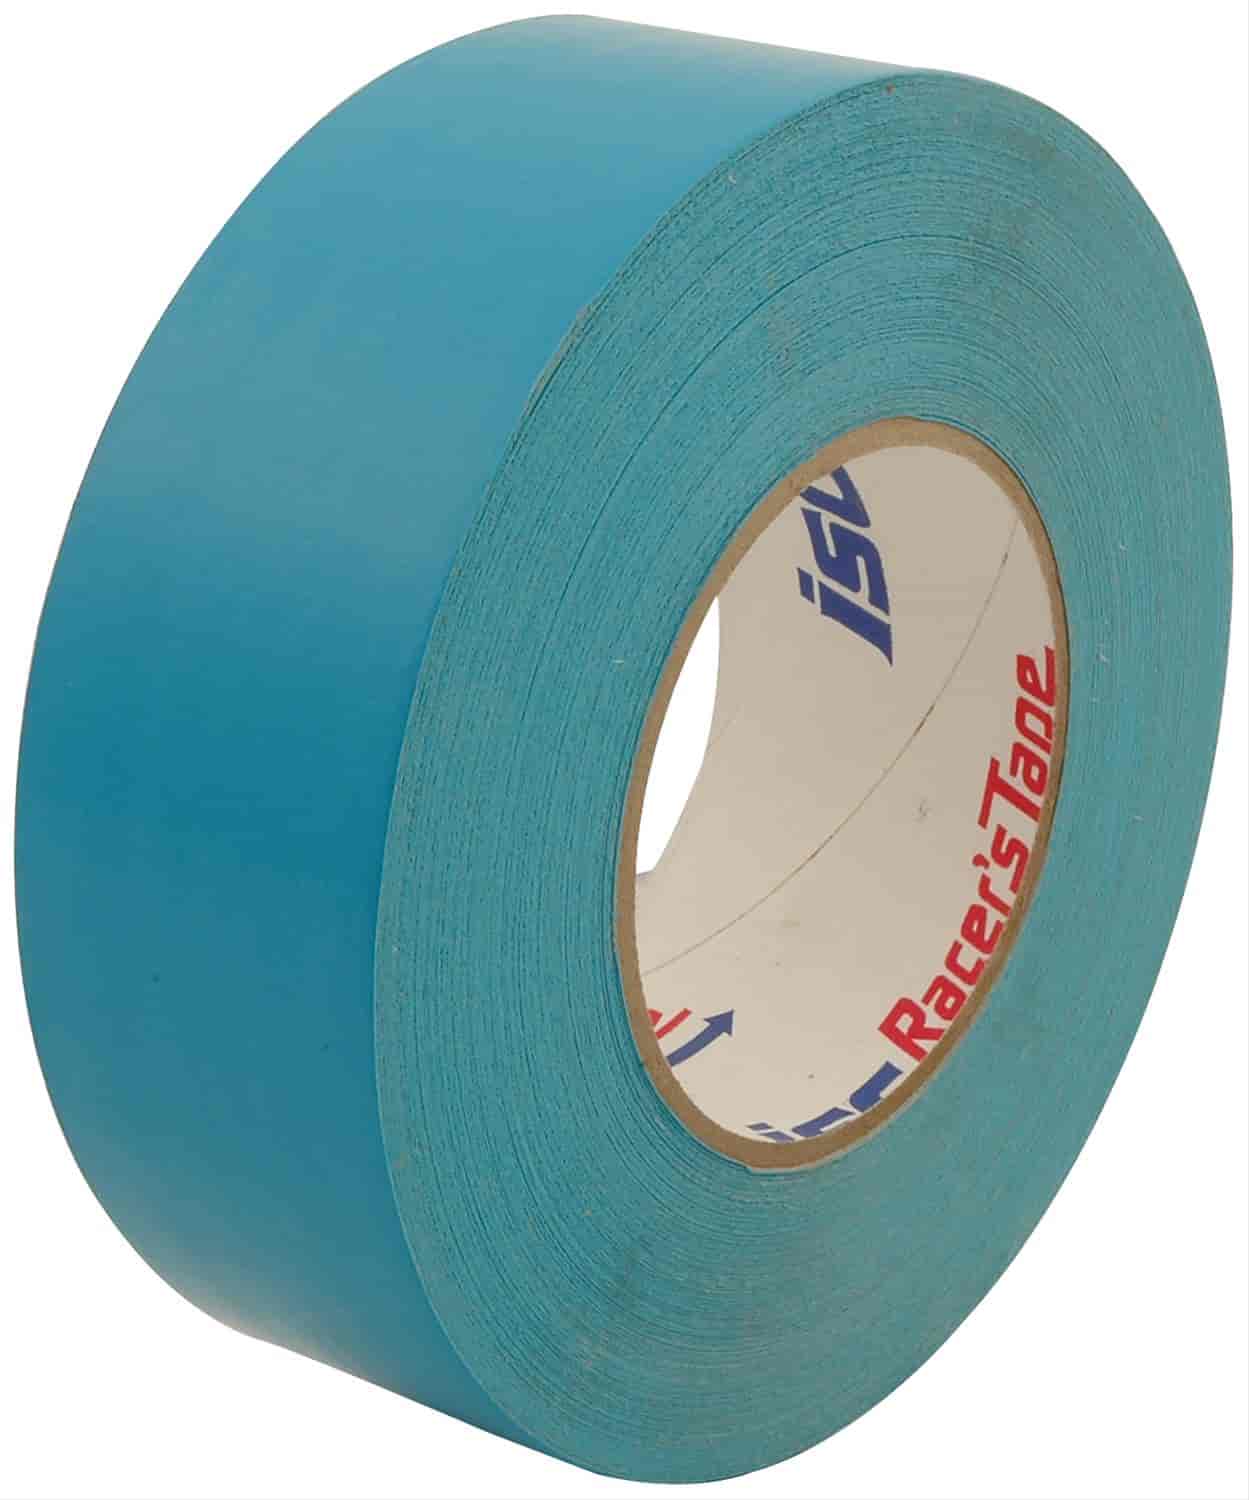 2" x 180" Racer"s Tape Teal